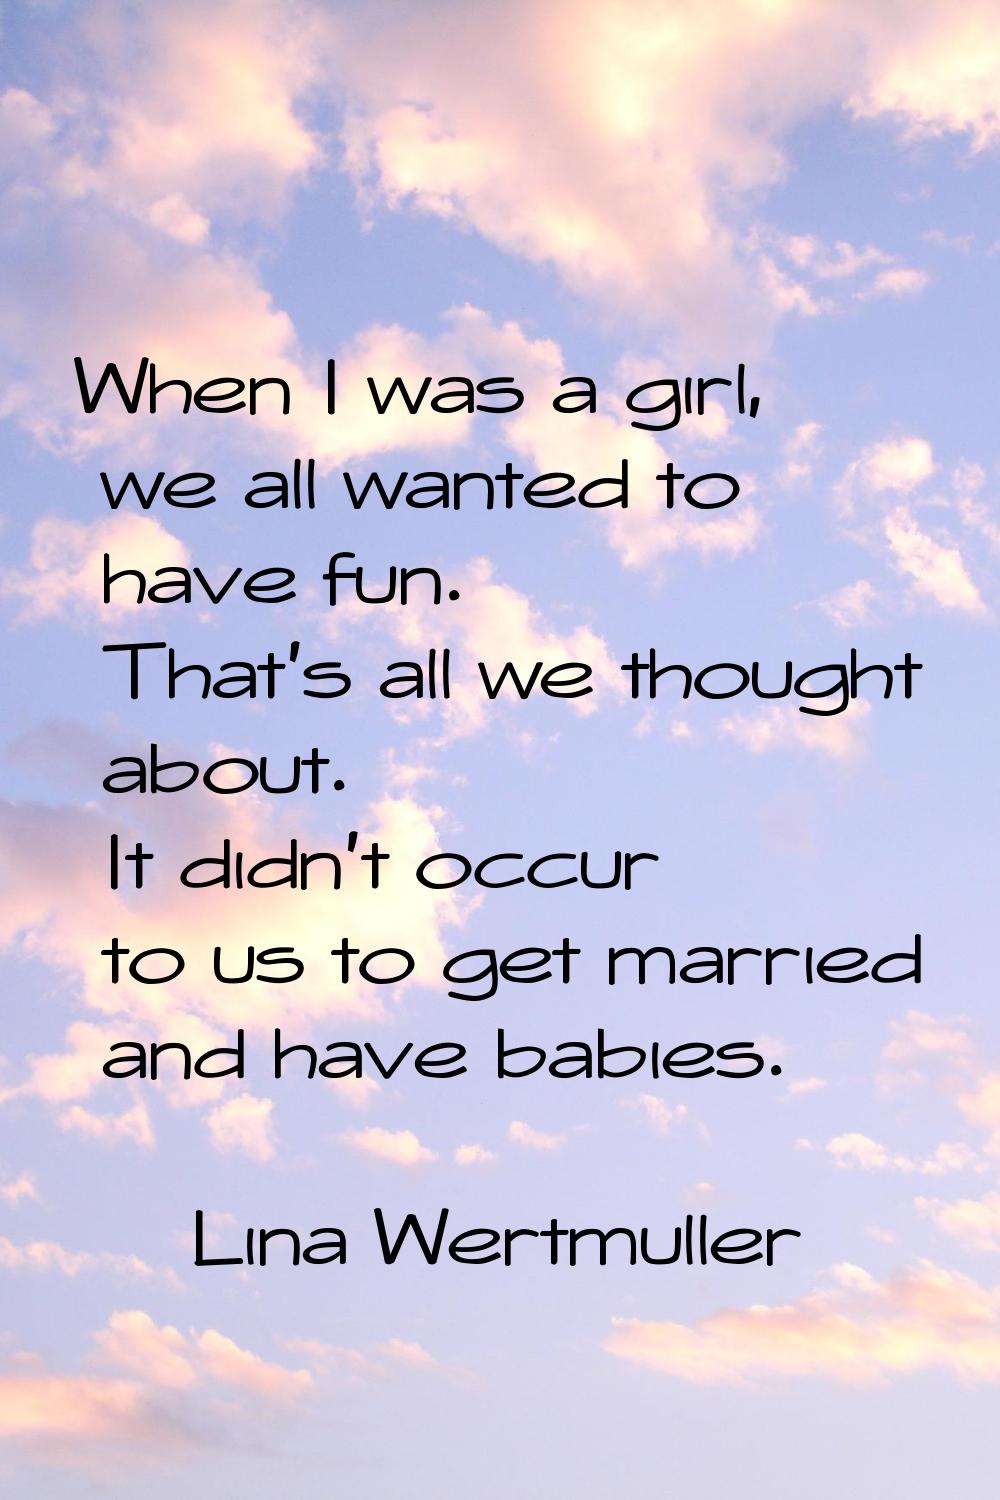 When I was a girl, we all wanted to have fun. That's all we thought about. It didn't occur to us to